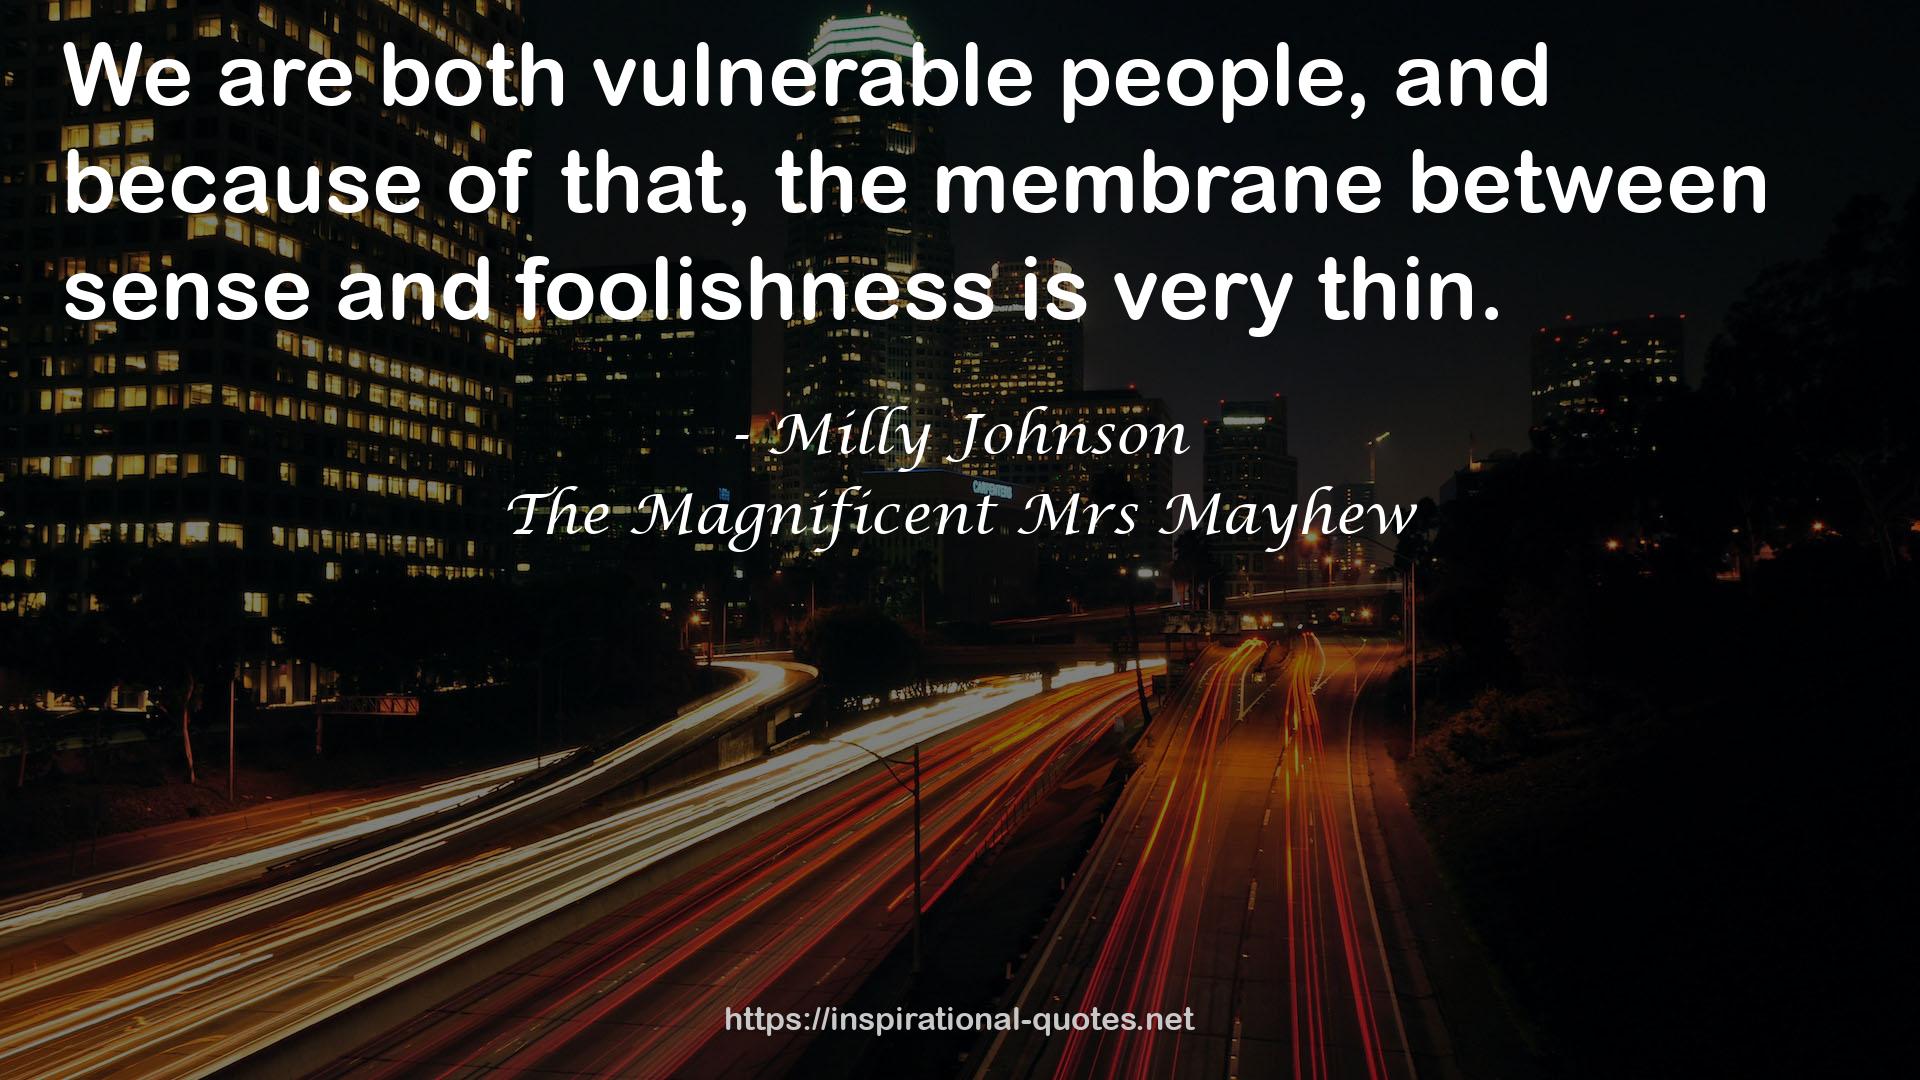 Milly Johnson QUOTES